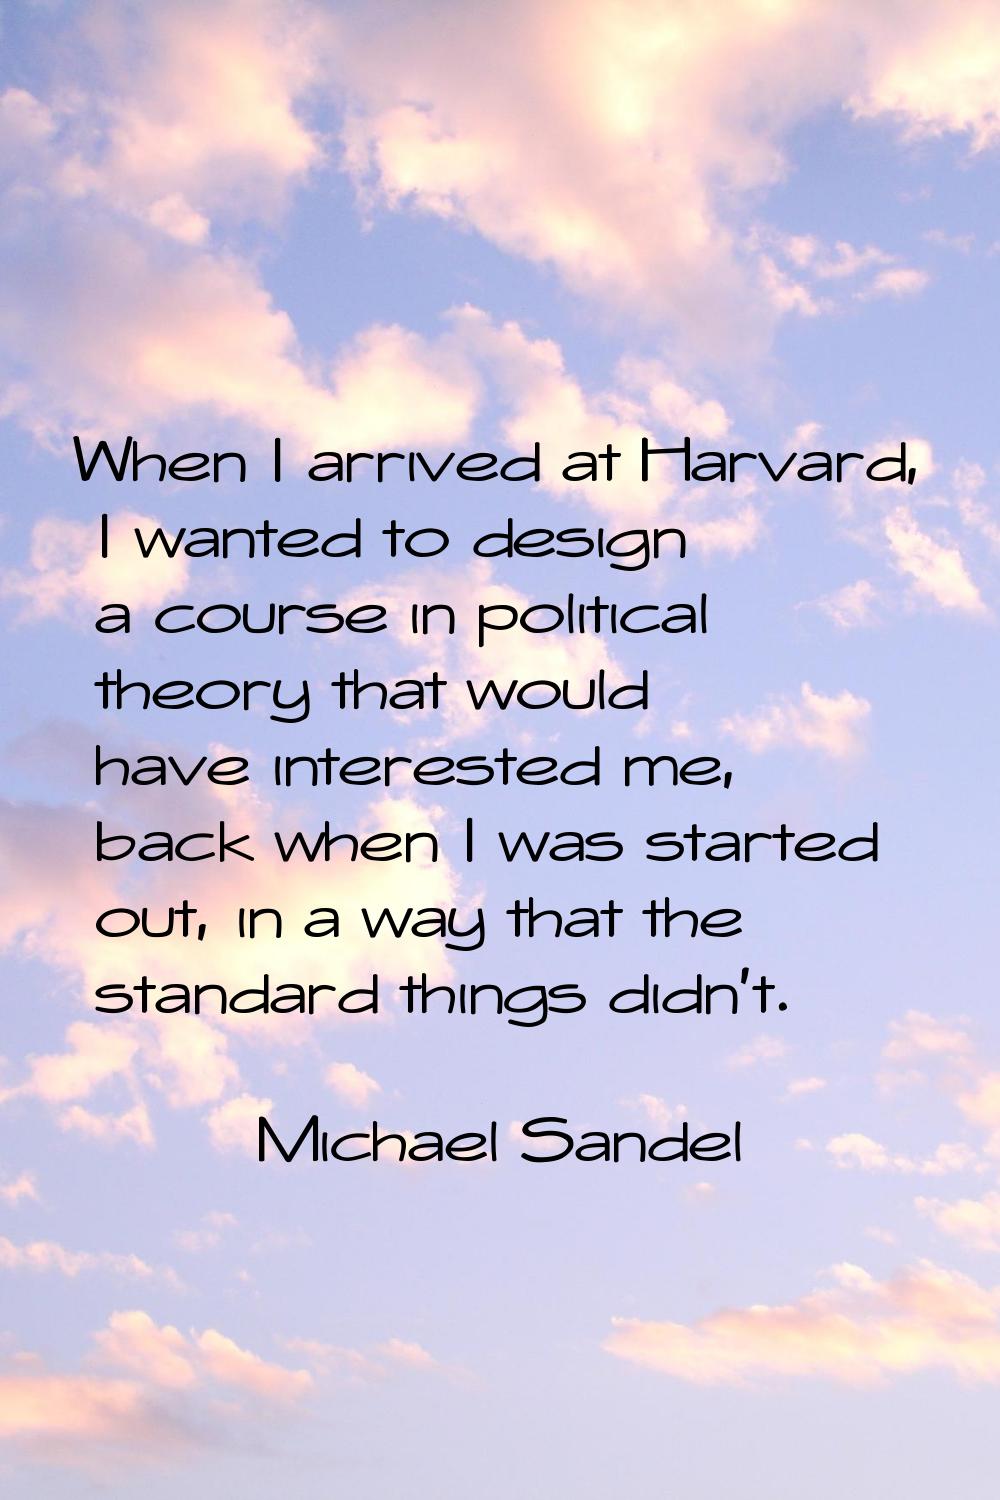 When I arrived at Harvard, I wanted to design a course in political theory that would have interest